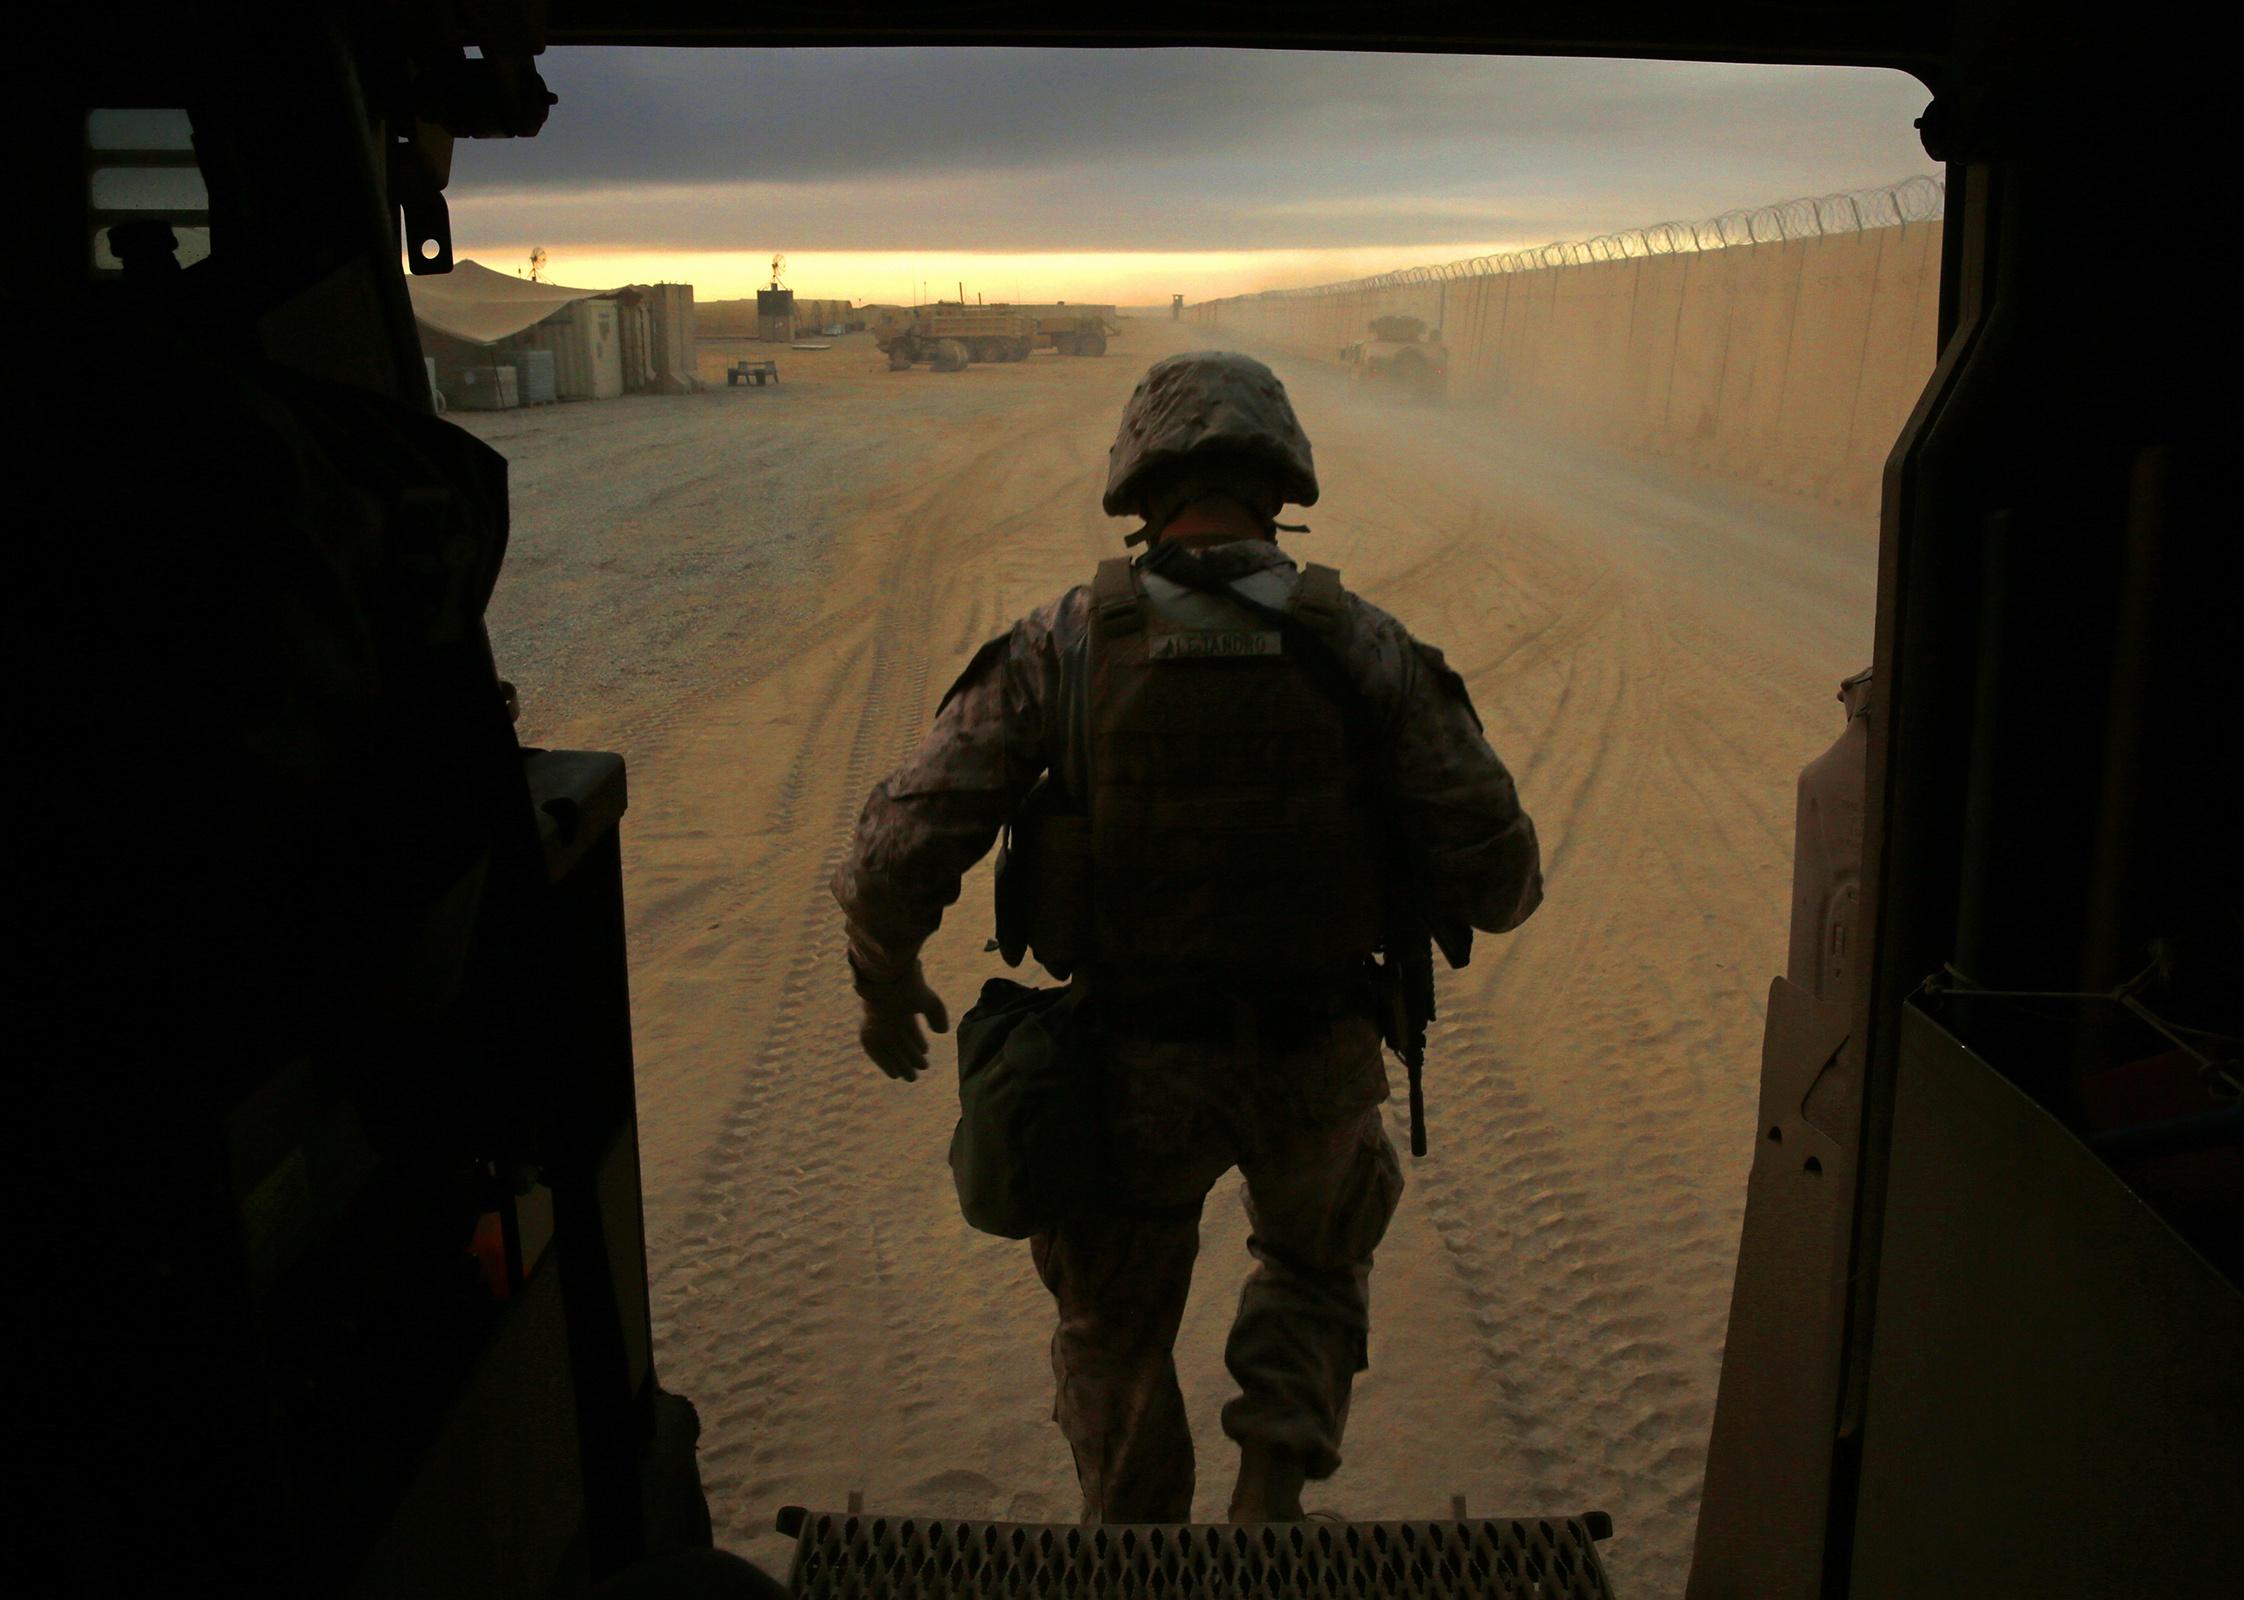 A U.S. soldier steps out of a bunker in Iraq.